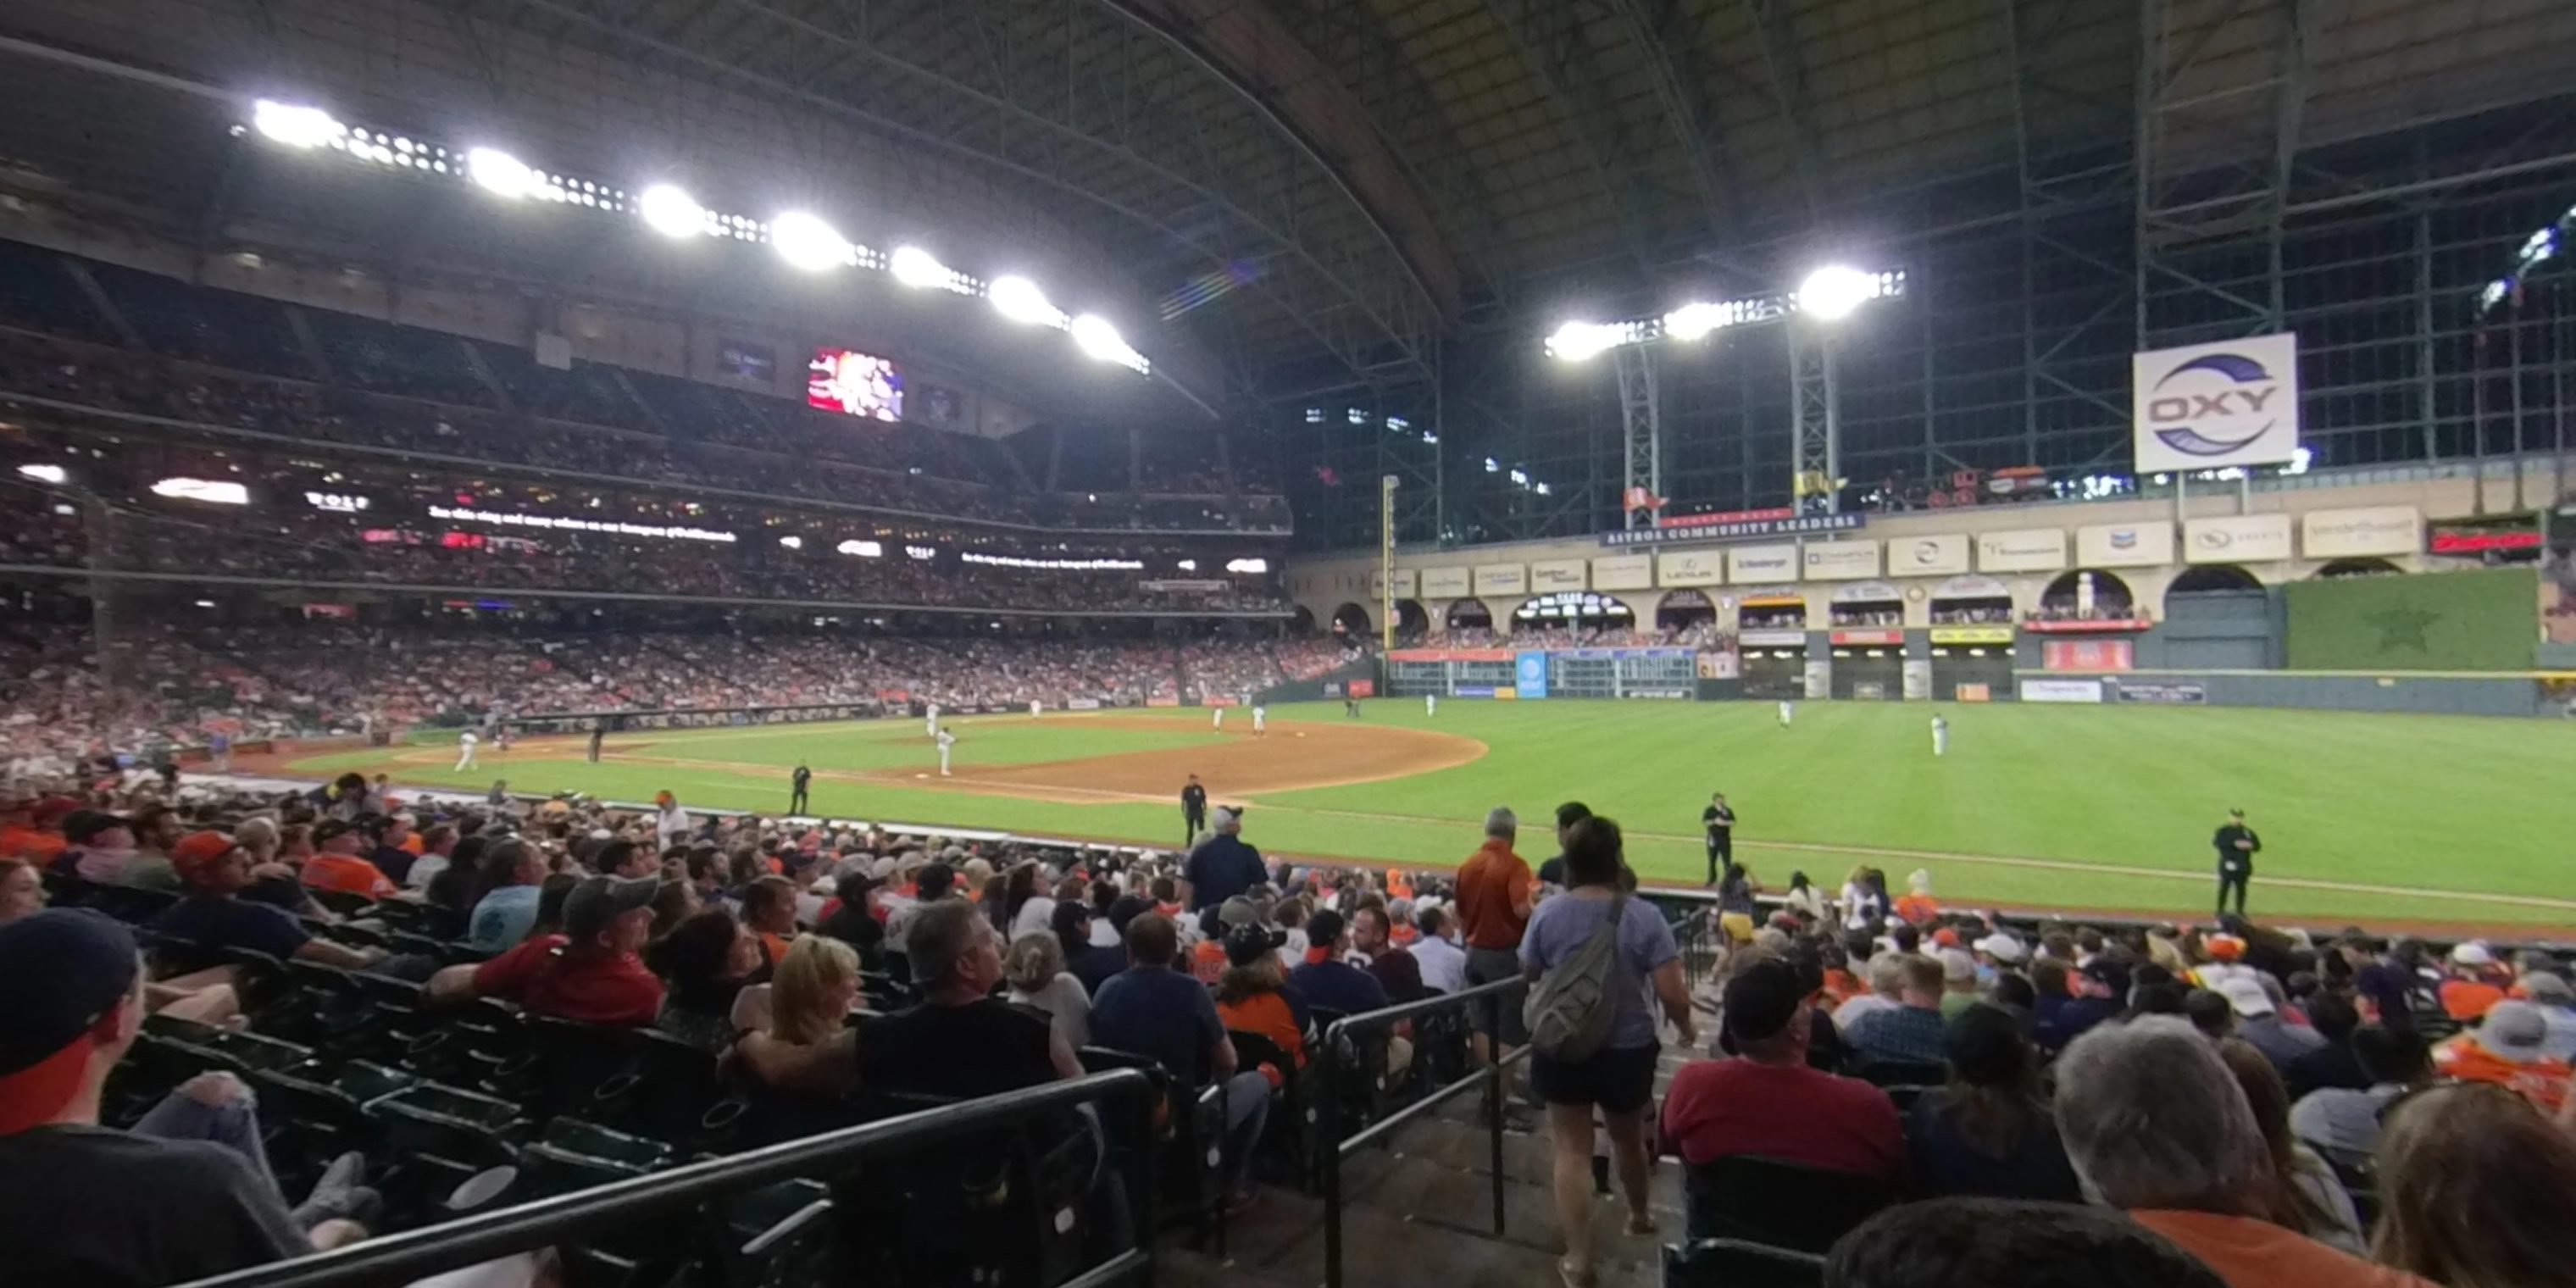 section 128 panoramic seat view  for baseball - minute maid park